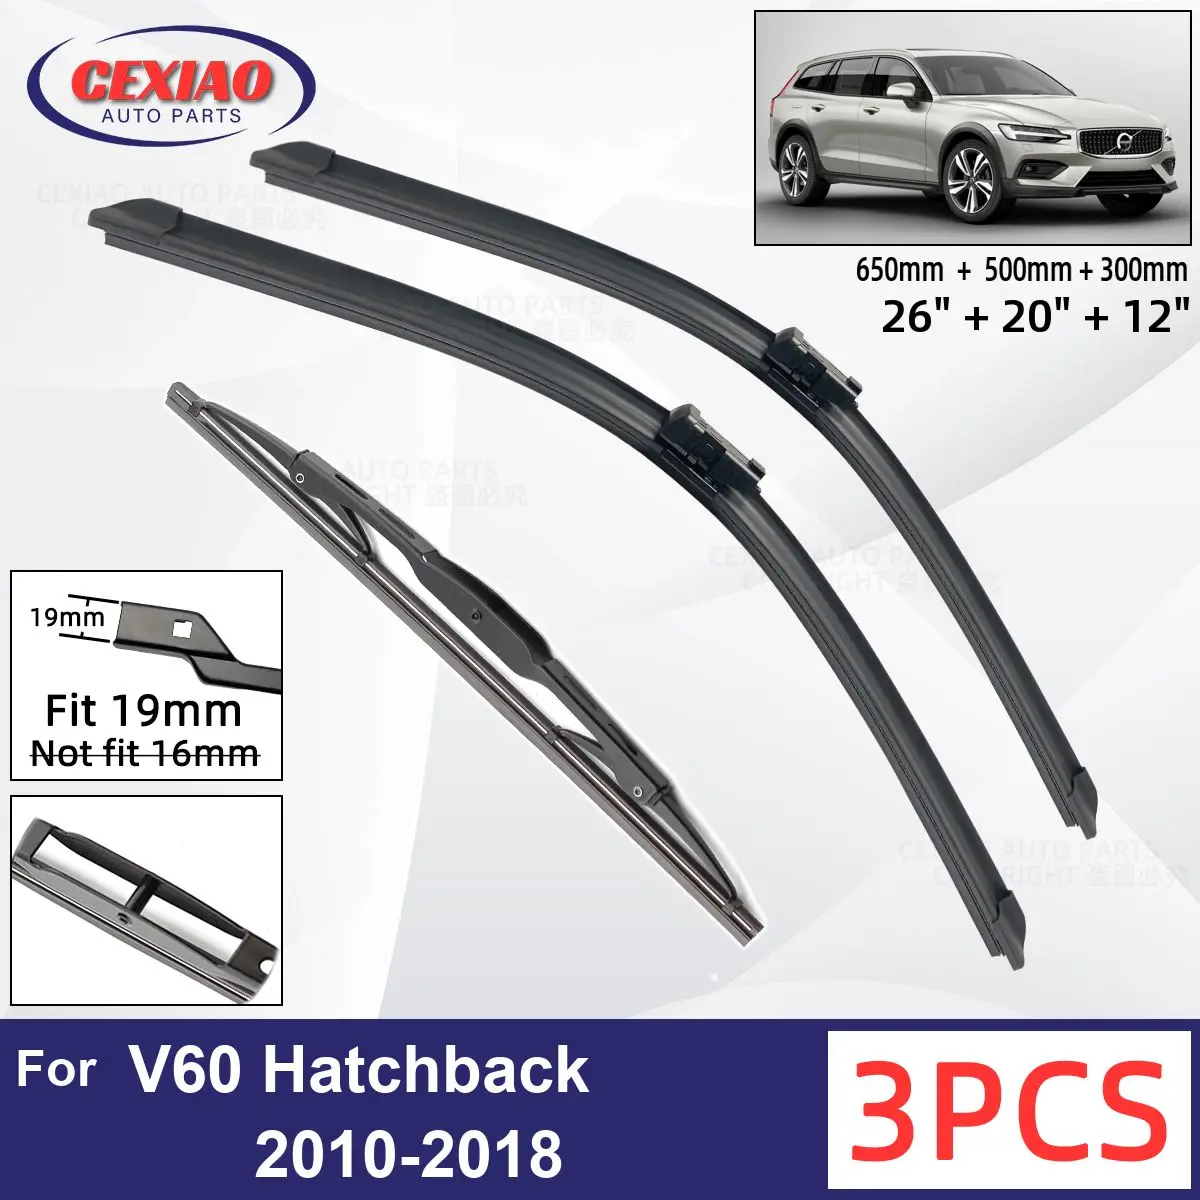 

For Volvo V60 Hatchback 2010-2018 Car Front Rear Wiper Blades Soft Rubber Windscreen Wipers Auto Windshield 26"20"12" 2016 2017